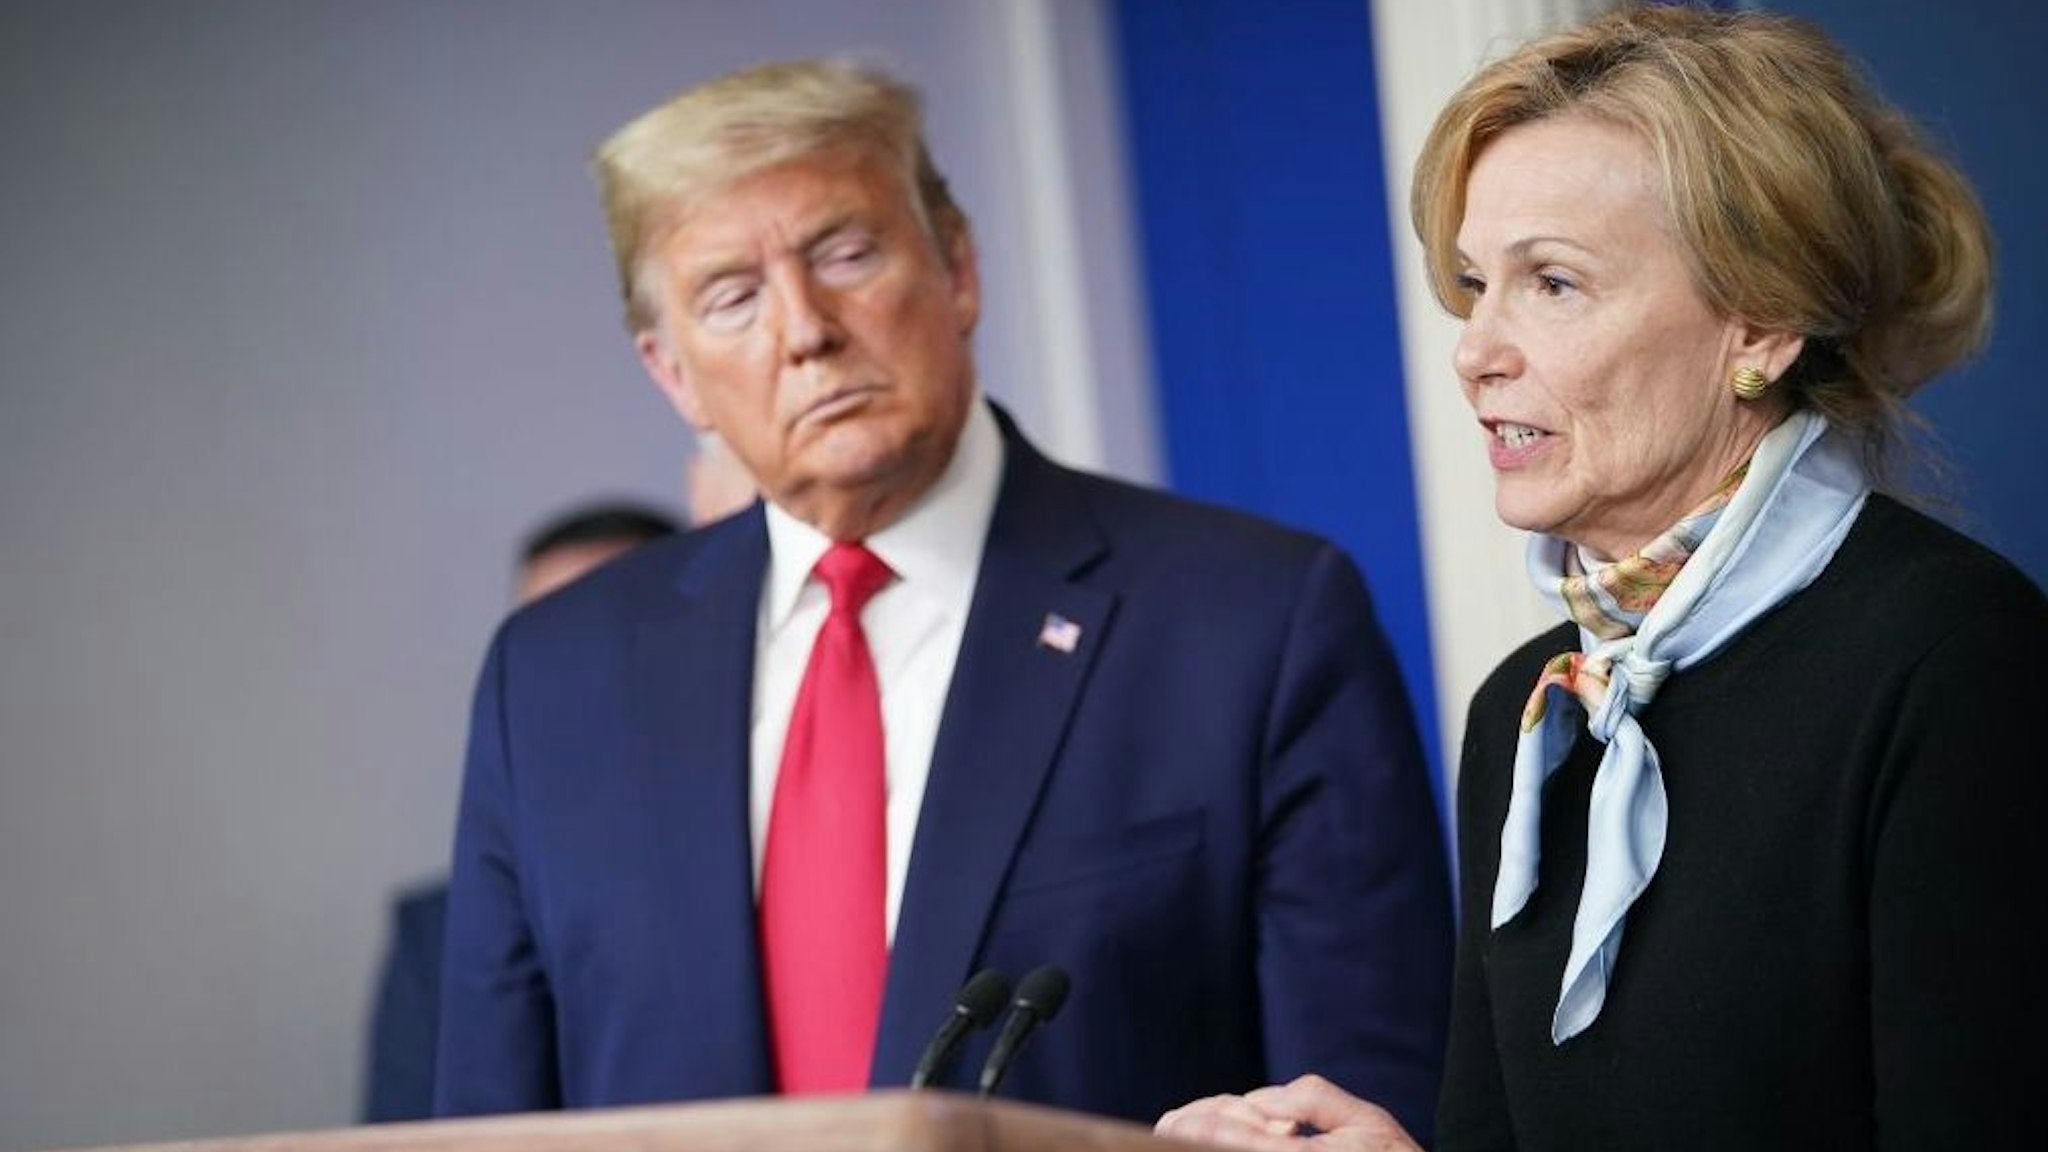 Response coordinator for White House Coronavirus Task Force Deborah Birx speaks, while US President Donald Trump listens, during the daily briefing on the novel coronavirus, COVID-19, at the White House on March 24, 2020, in Washington, DC.